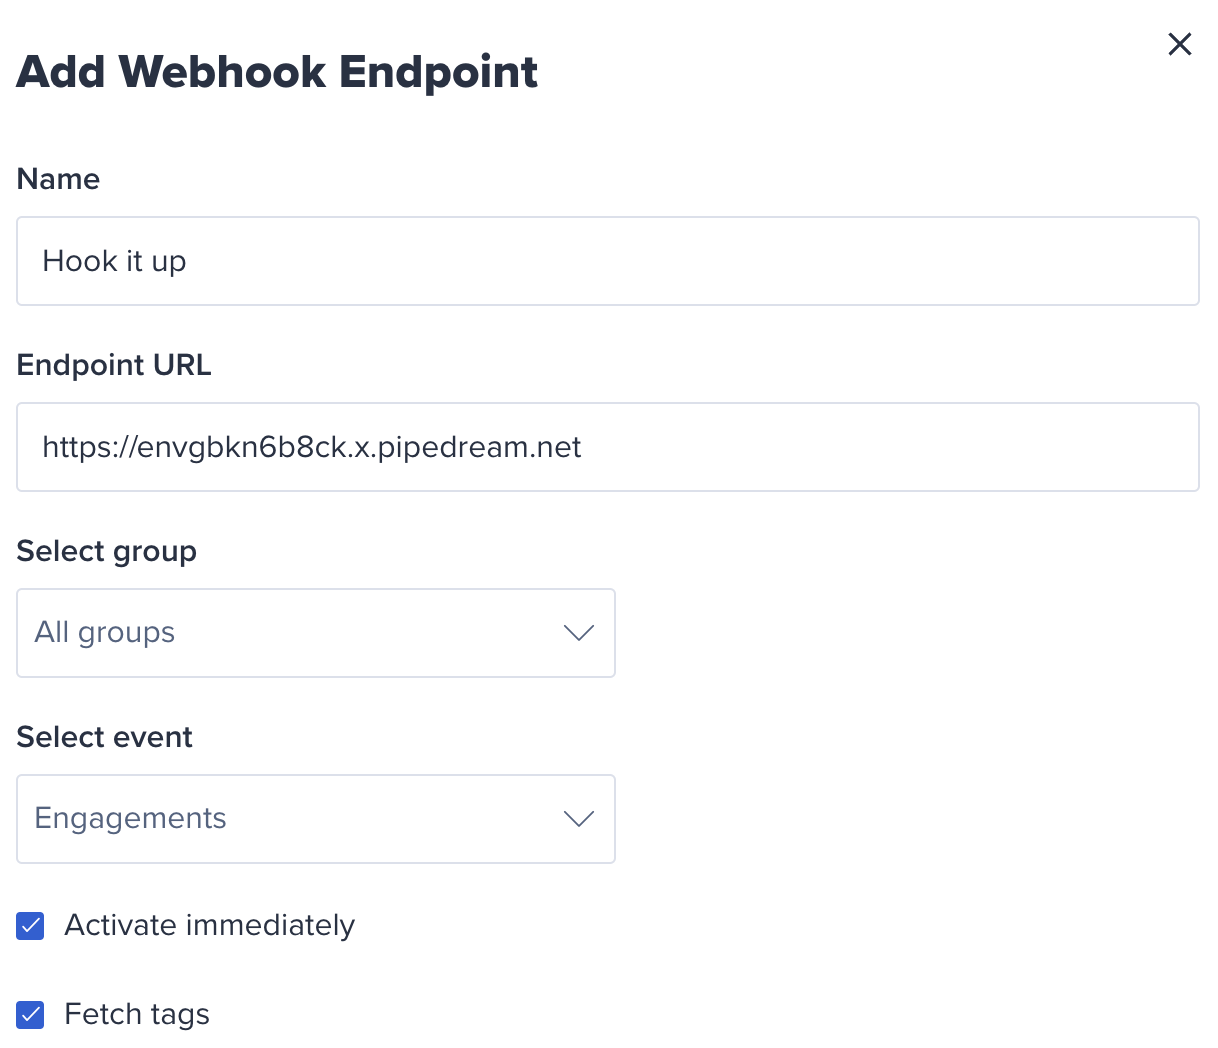 Bitly_Webhooks_-_Add_wbh_endpoint.png